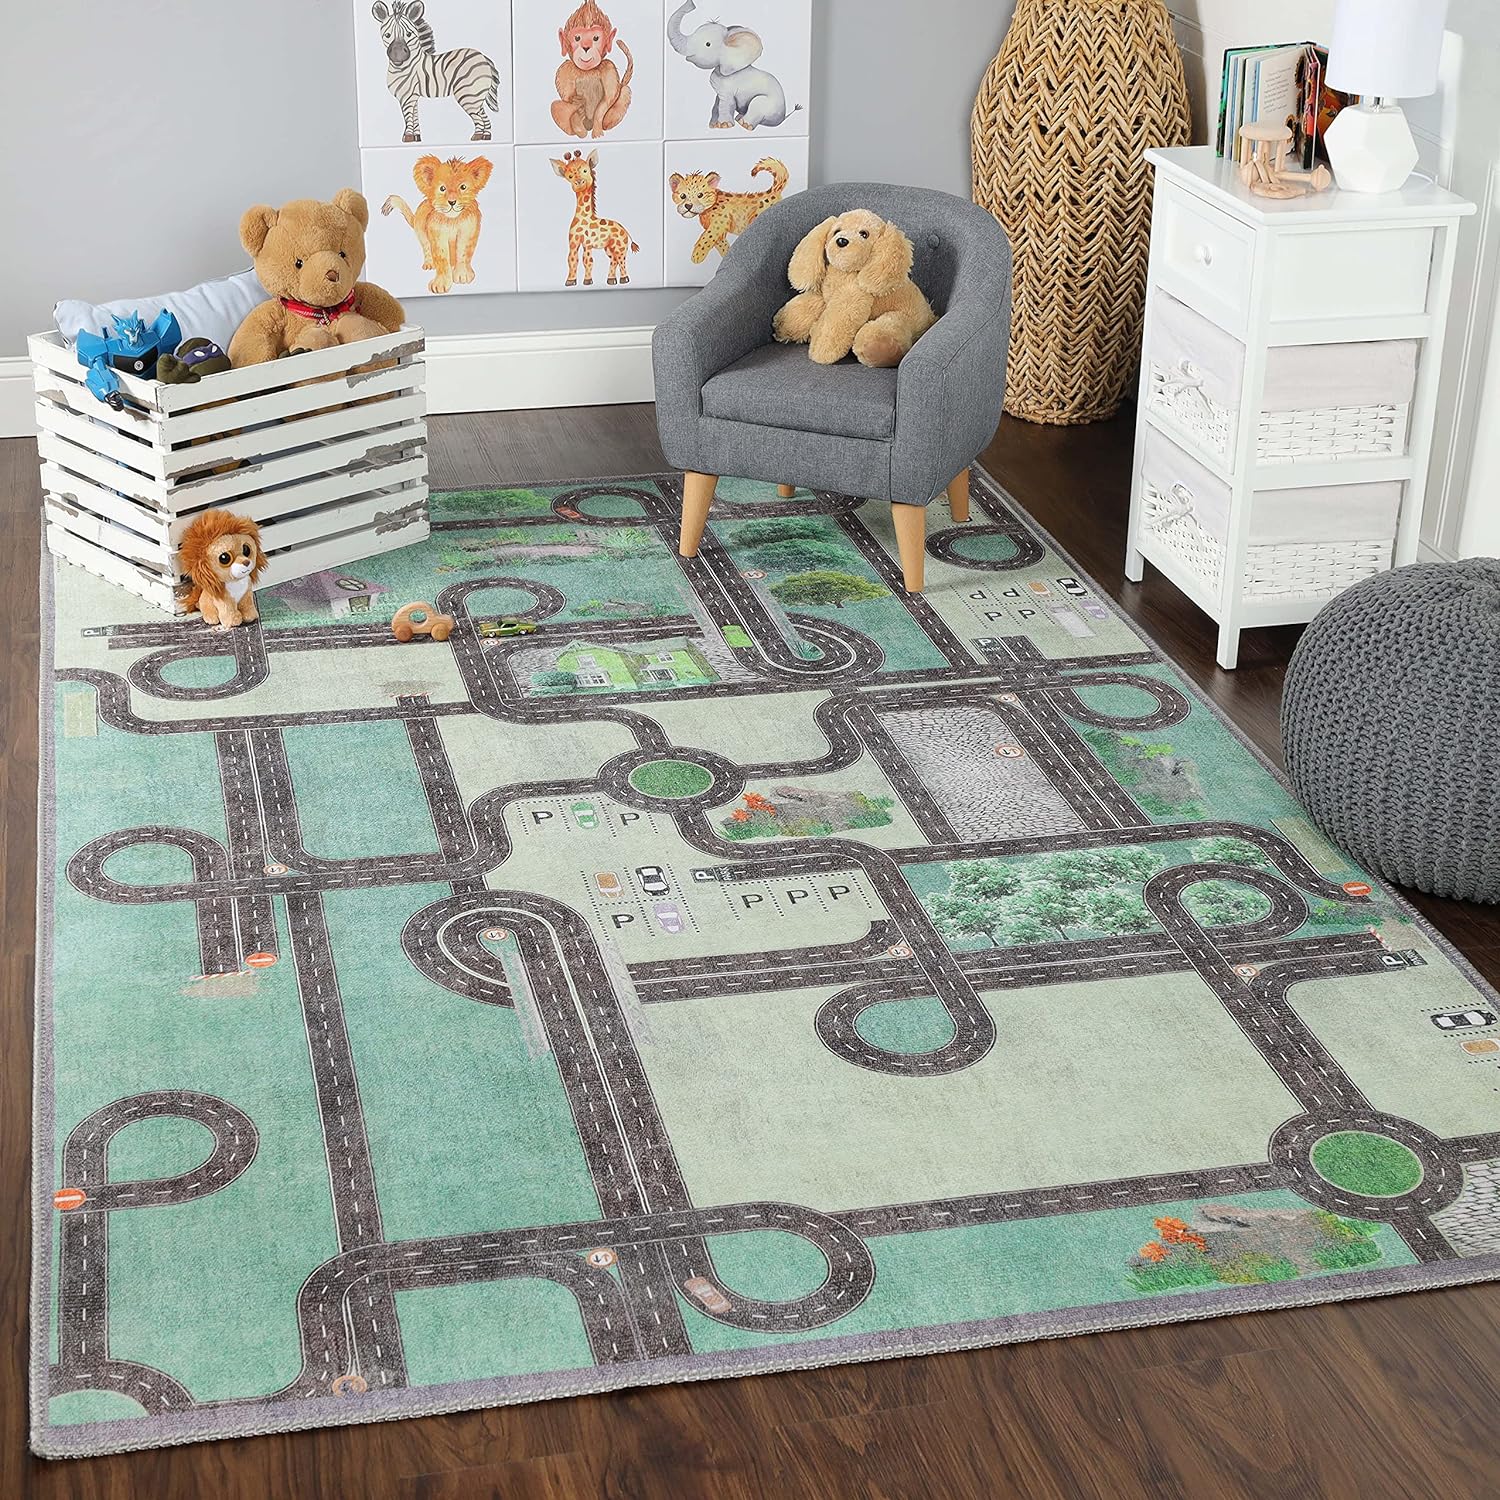 SUPERIOR Kids Indoor Area Rug, Country Road Floor Decor for Kids Bedroom Decorations, Colorful Throw, Play Room Accessories, Nursery Bedrooms, Cute, Soft, Washable Rugs, 4 x 6, Pine Green